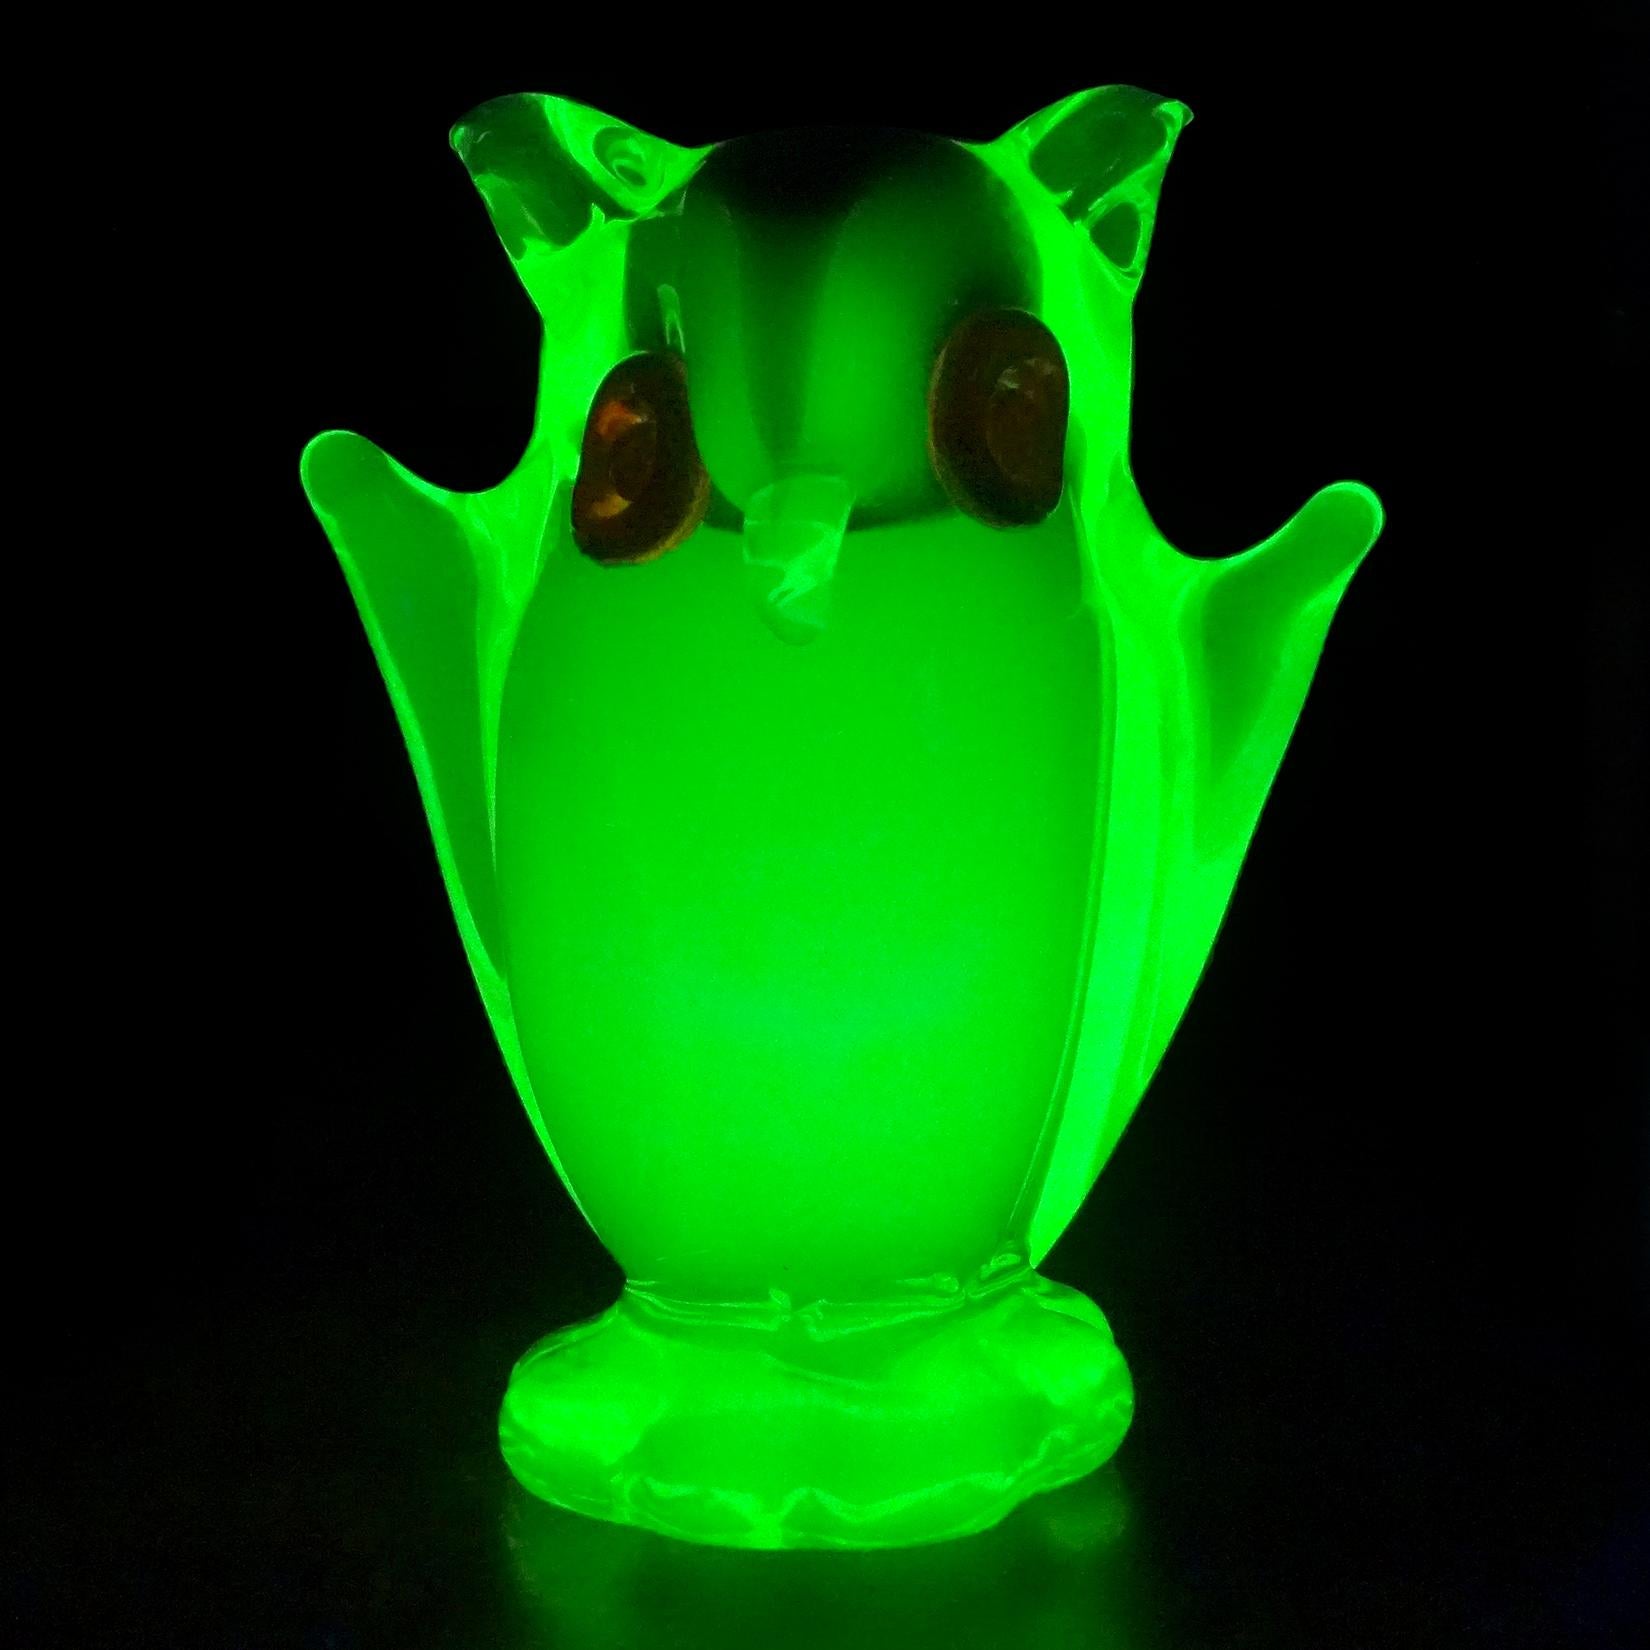 Beautiful and cute, vintage Murano hand blown Sommerso bright yellow-green with inner olive green head, Italian art glass owl figurine sculpture. It has red applies eyes and stands on small attached base. The piece is made with Uranium 